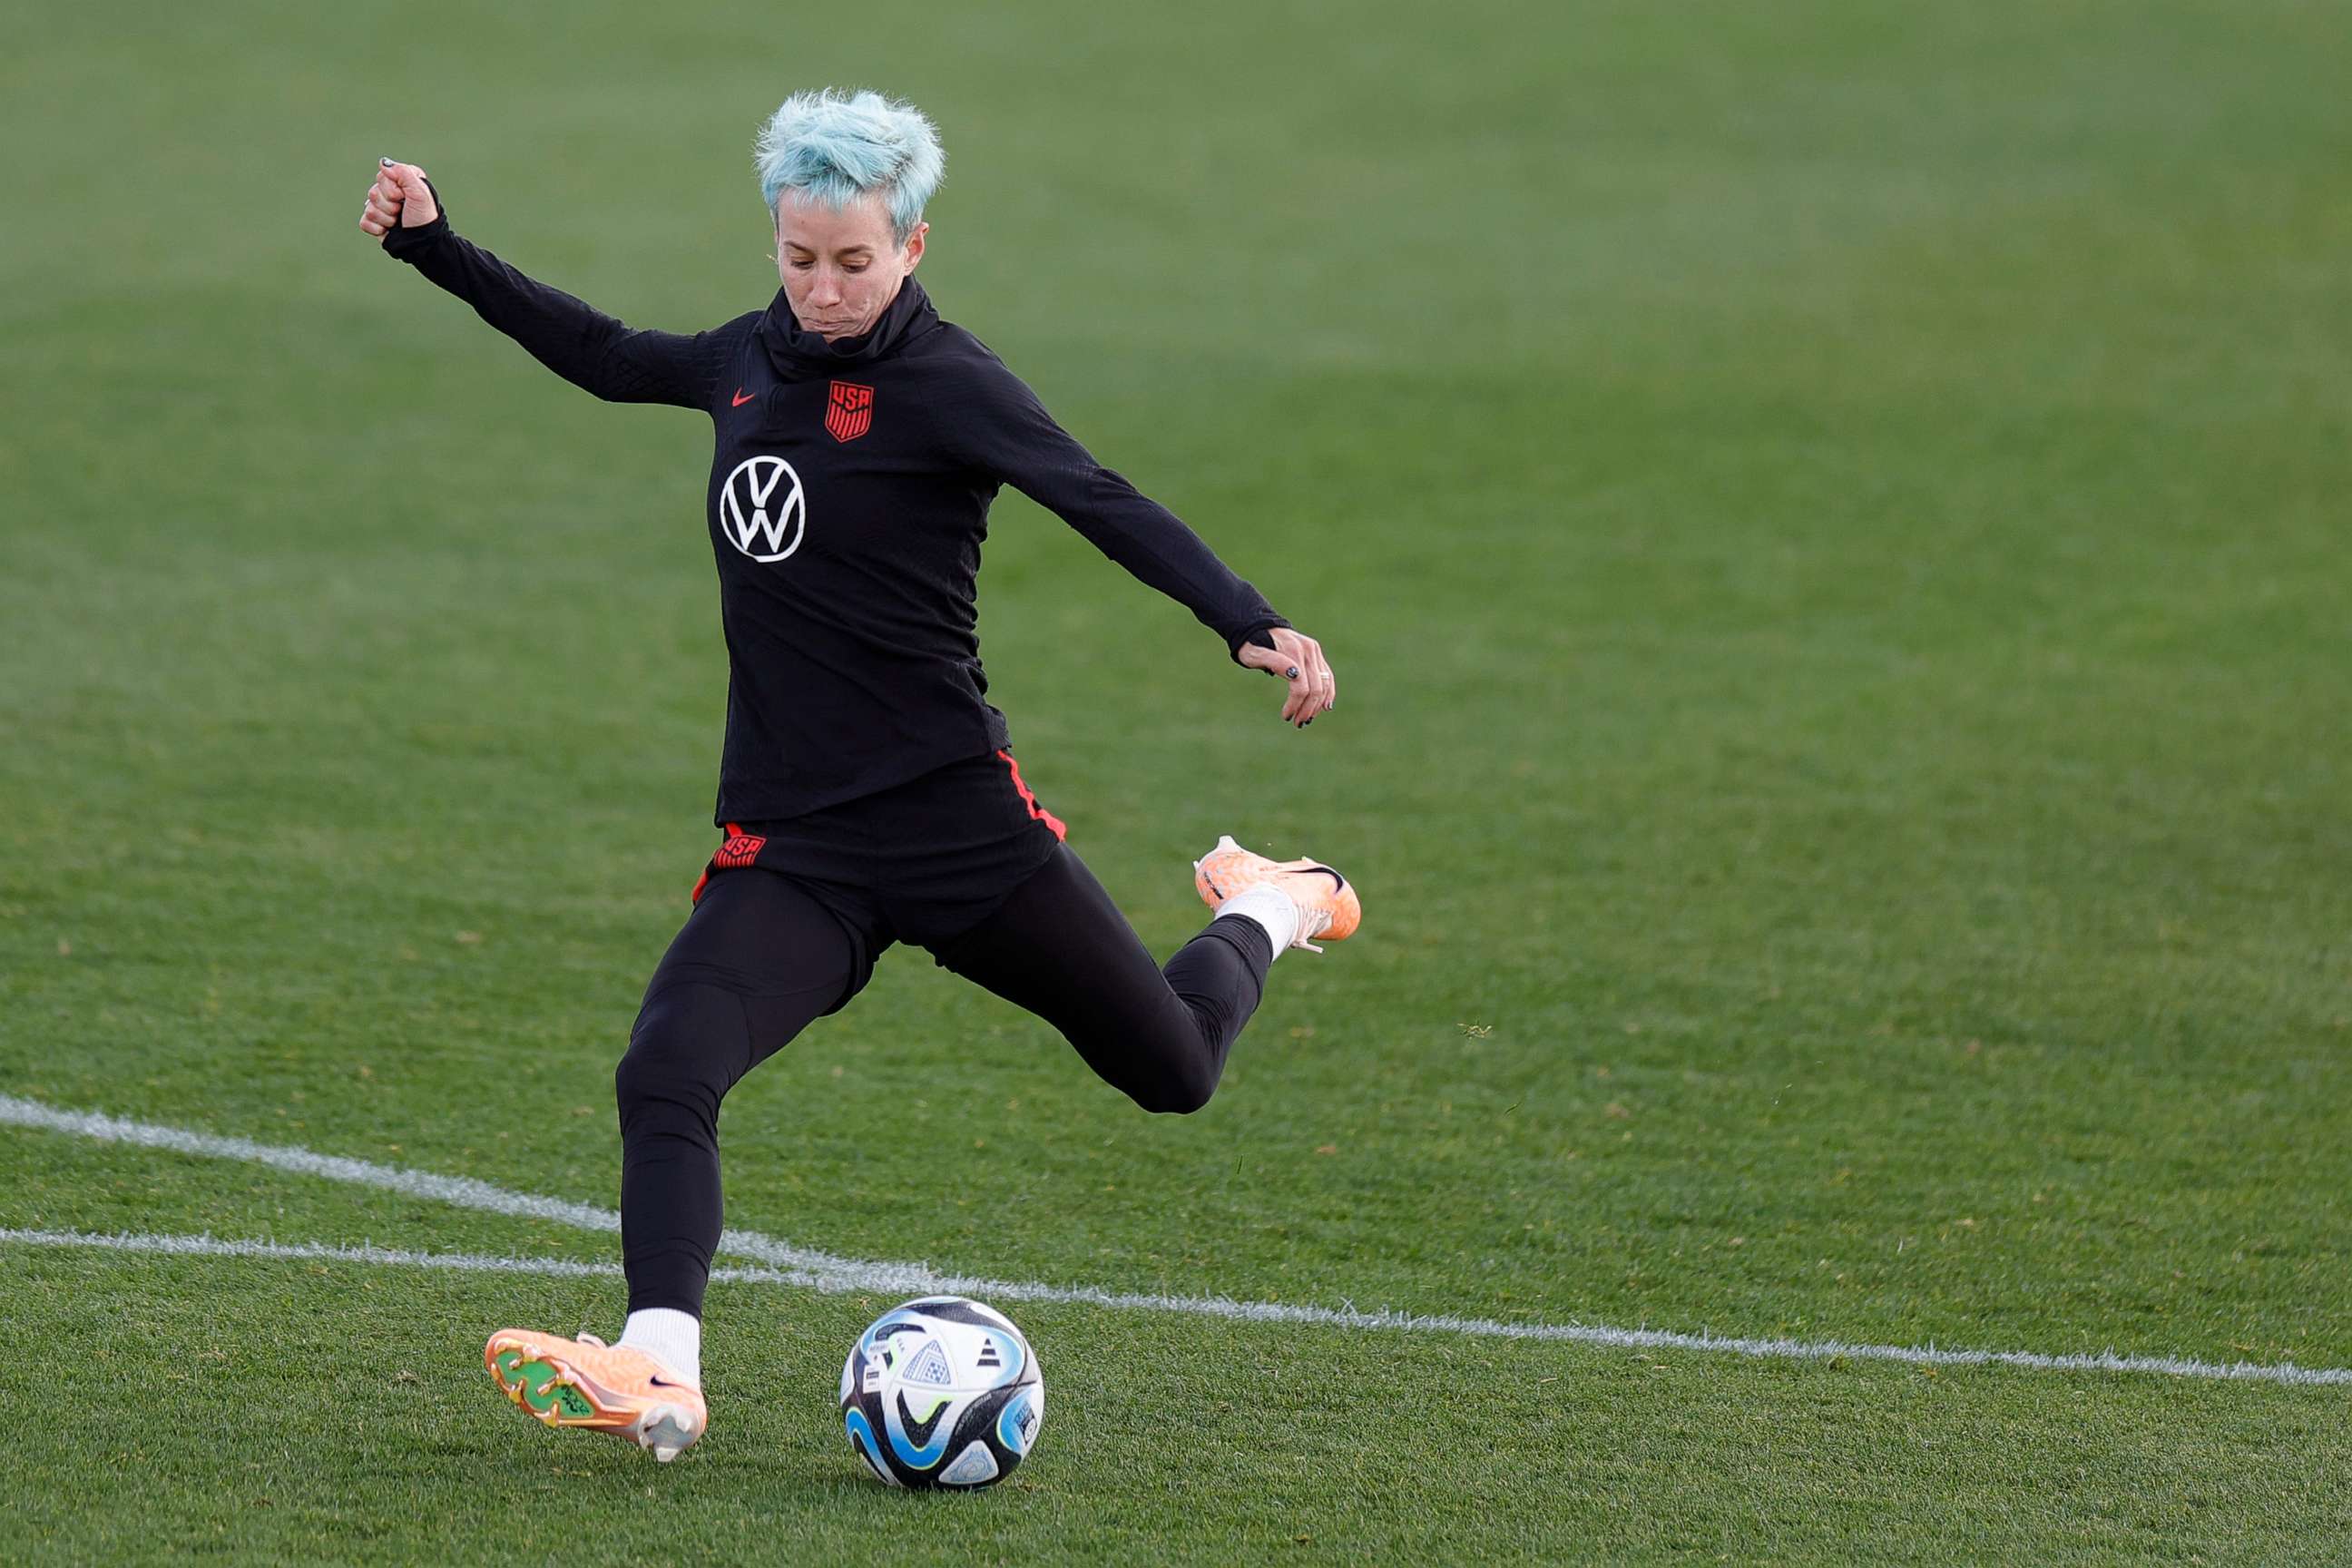 PHOTO: Megan Rapinoe #15 of the United States kicks the ball during training on July 18, 2023 in Auckland, New Zealand.